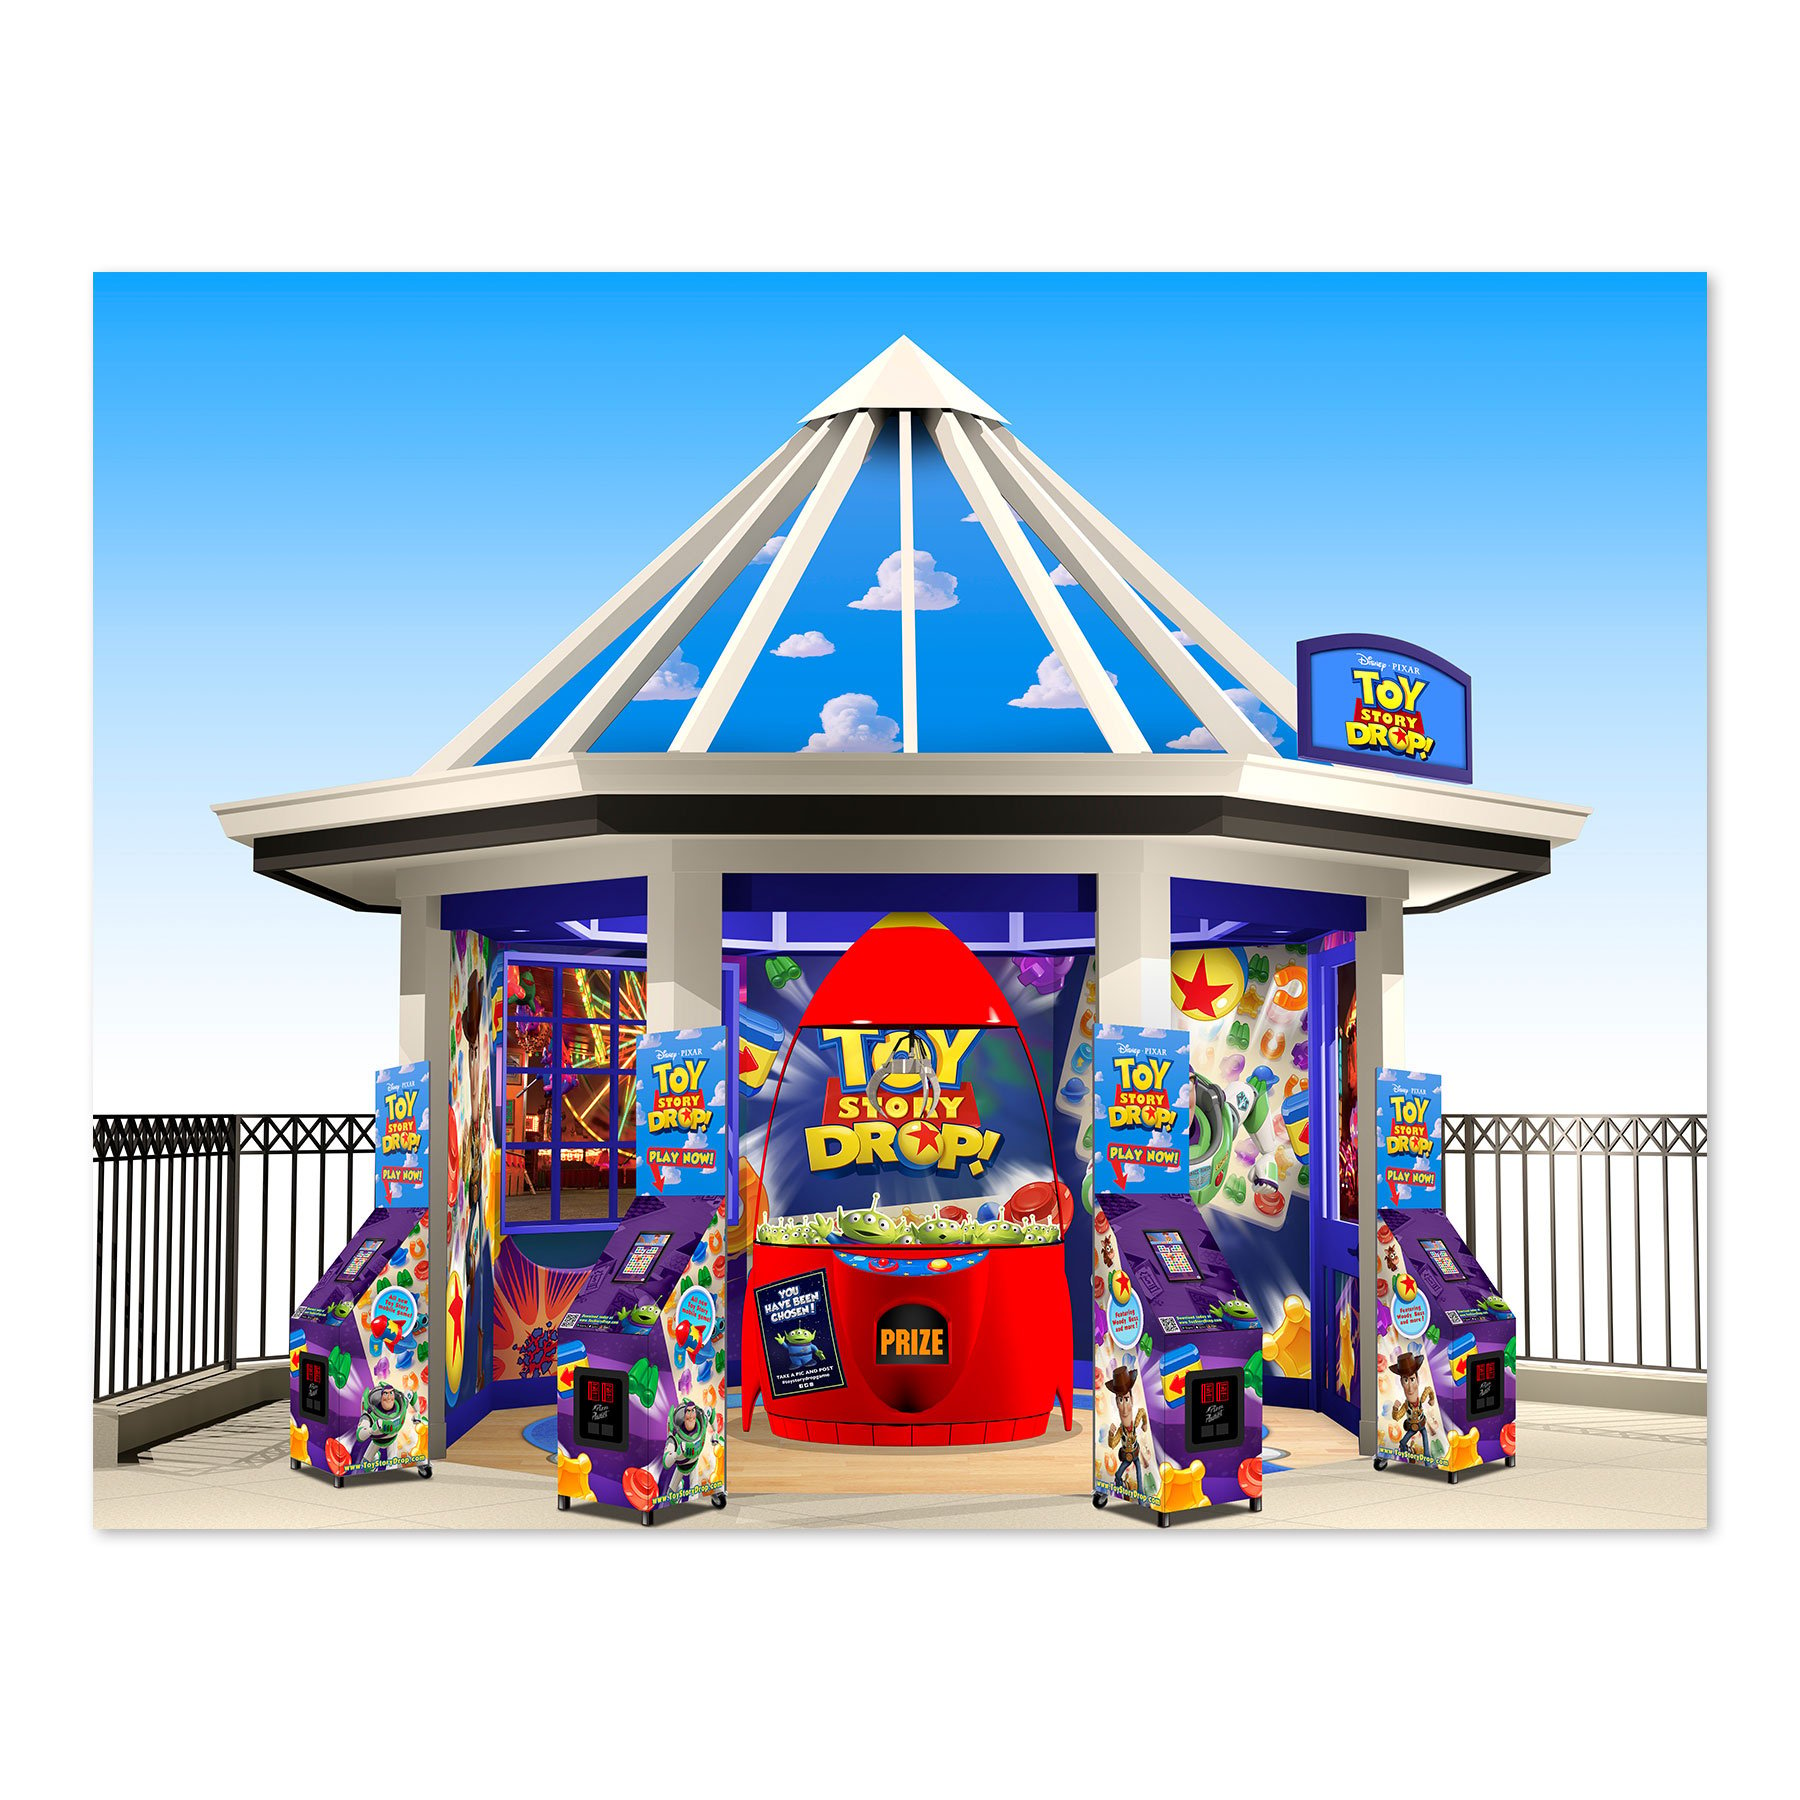 Toy Story 4 Gazebo For Toy Drop Game